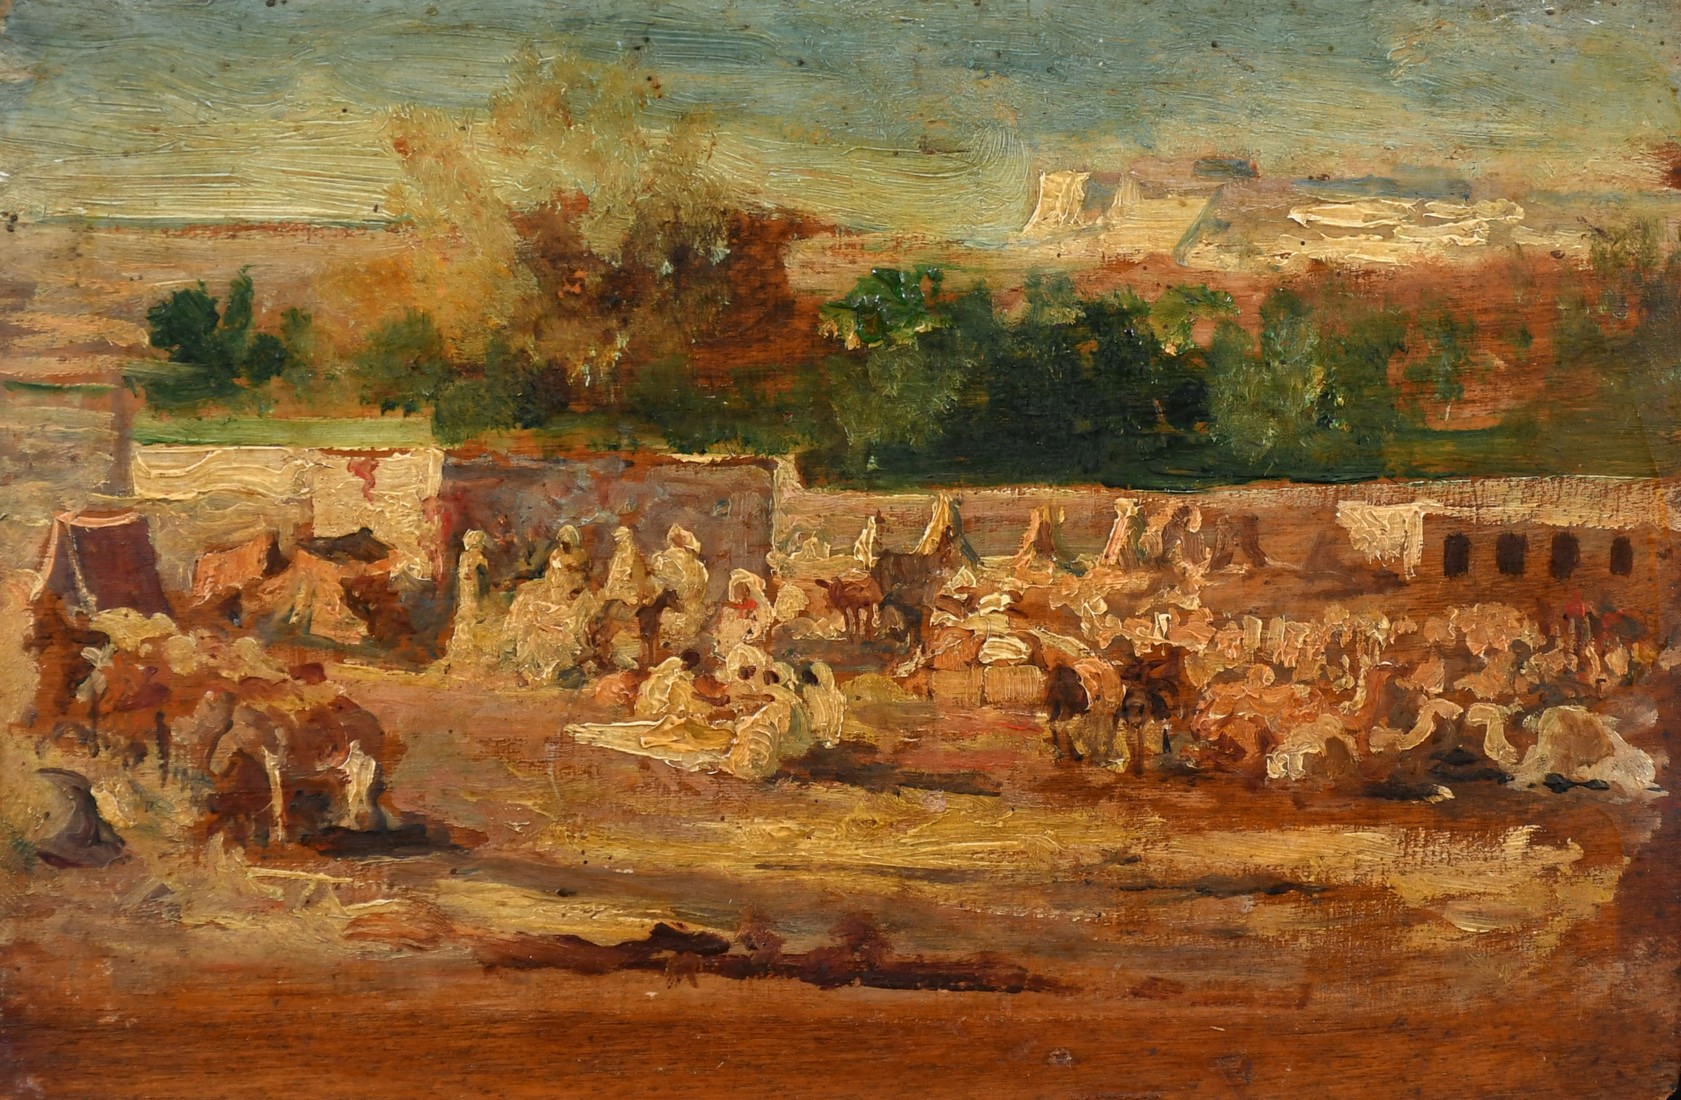 Early 20th Century, Figures and camels in an encampment, oil on panel, 5.25" x 7.5" (13 x 19cm), (